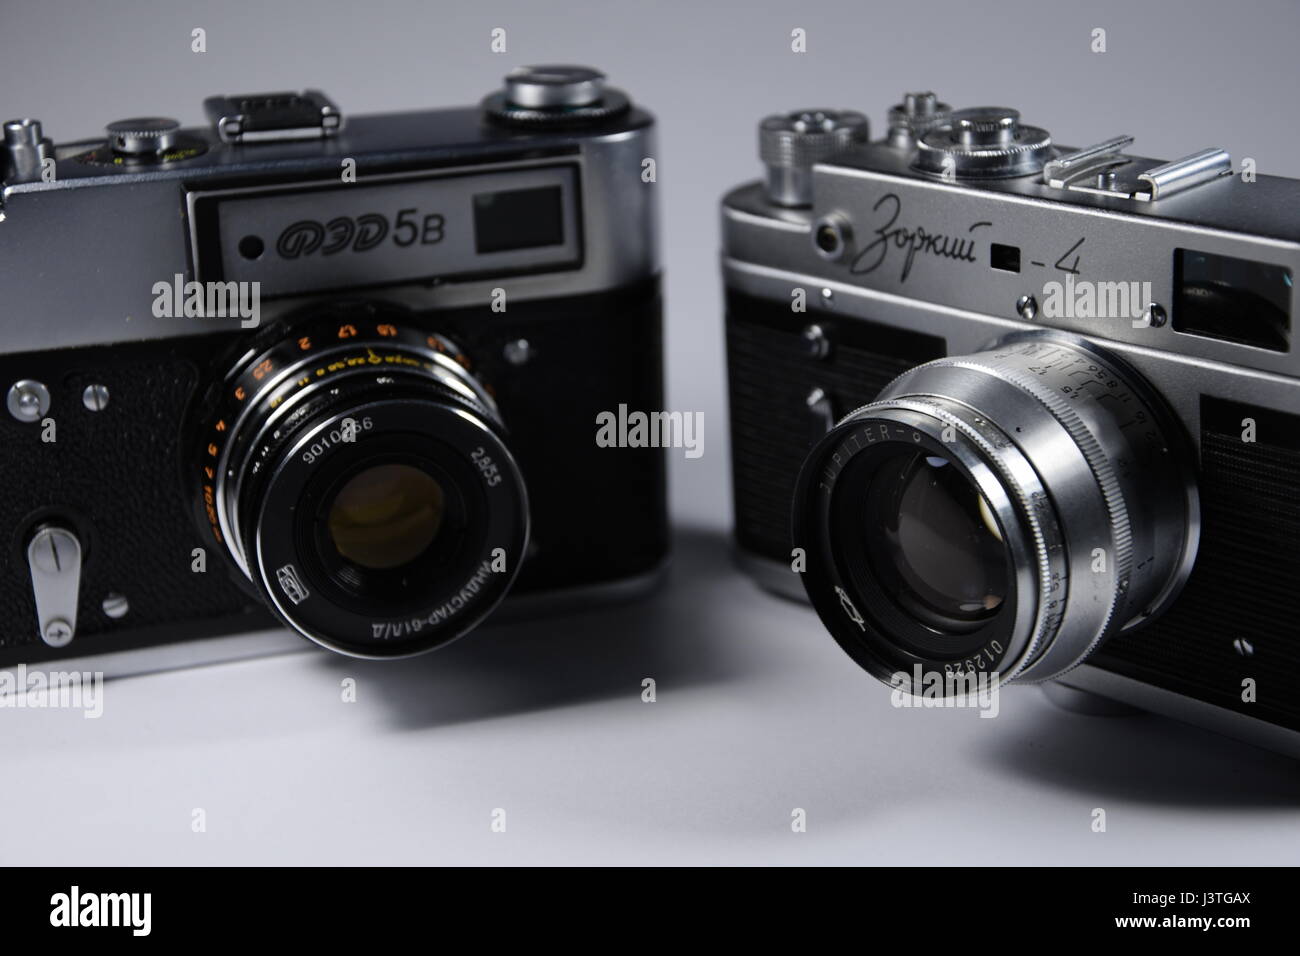 Old soviet camera Zorki 4 and FED 5B with old lenses jupiter 8 50 mm f/2 and industar 55 mm f/2.8 Stock Photo